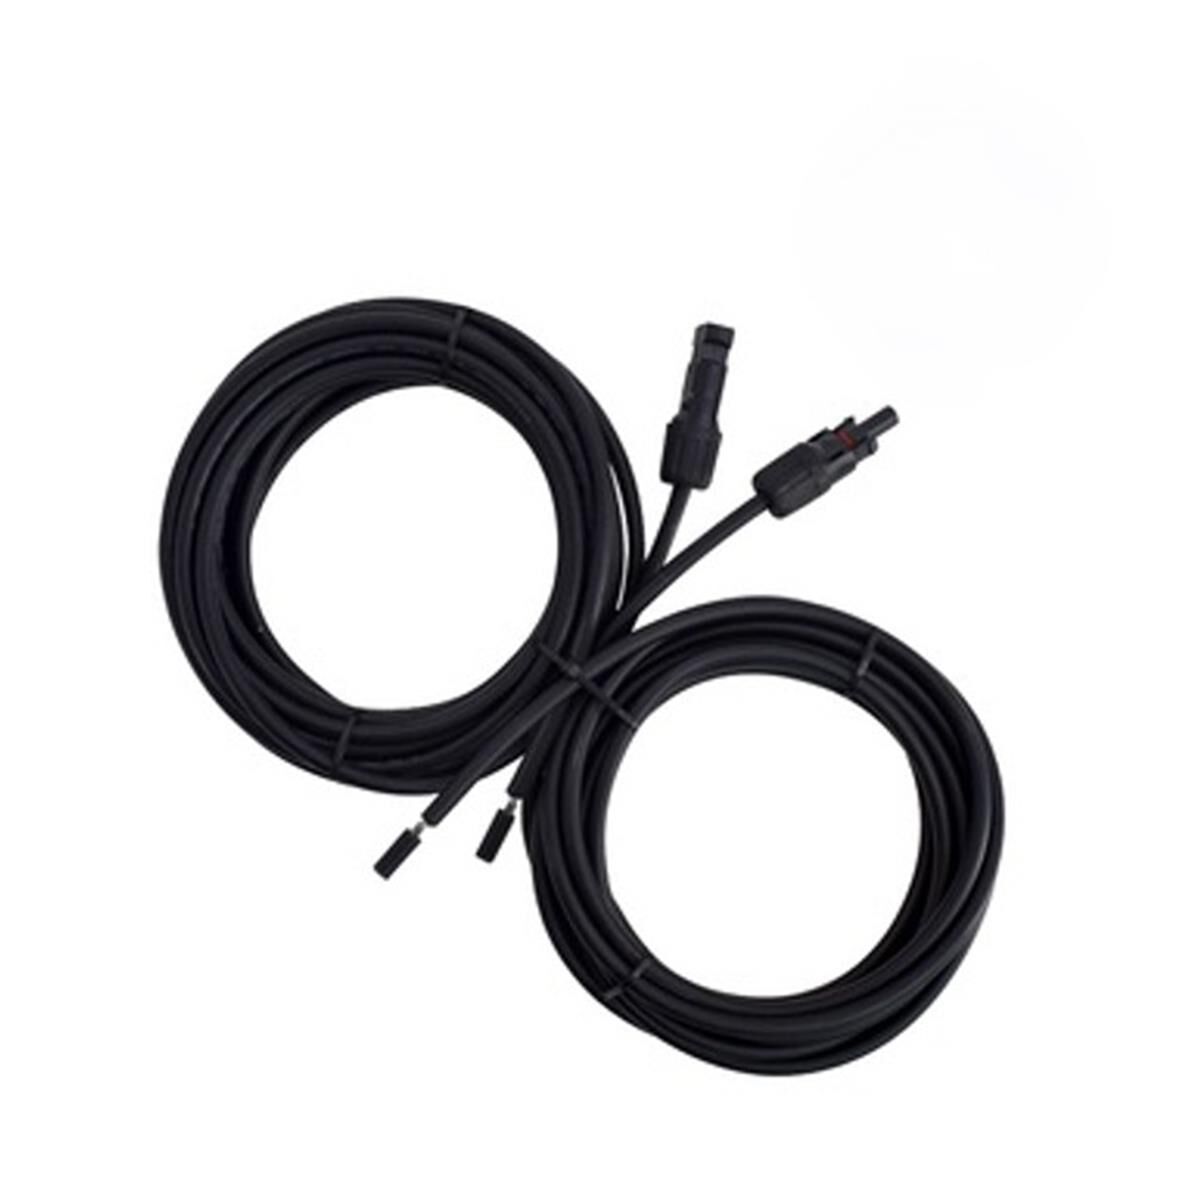 10FT SOLAR ADAPTOR KIT CABLES 10AWG CONNECTING SOLAR PANEL TO CONTROLLER, , scaau_hi-res